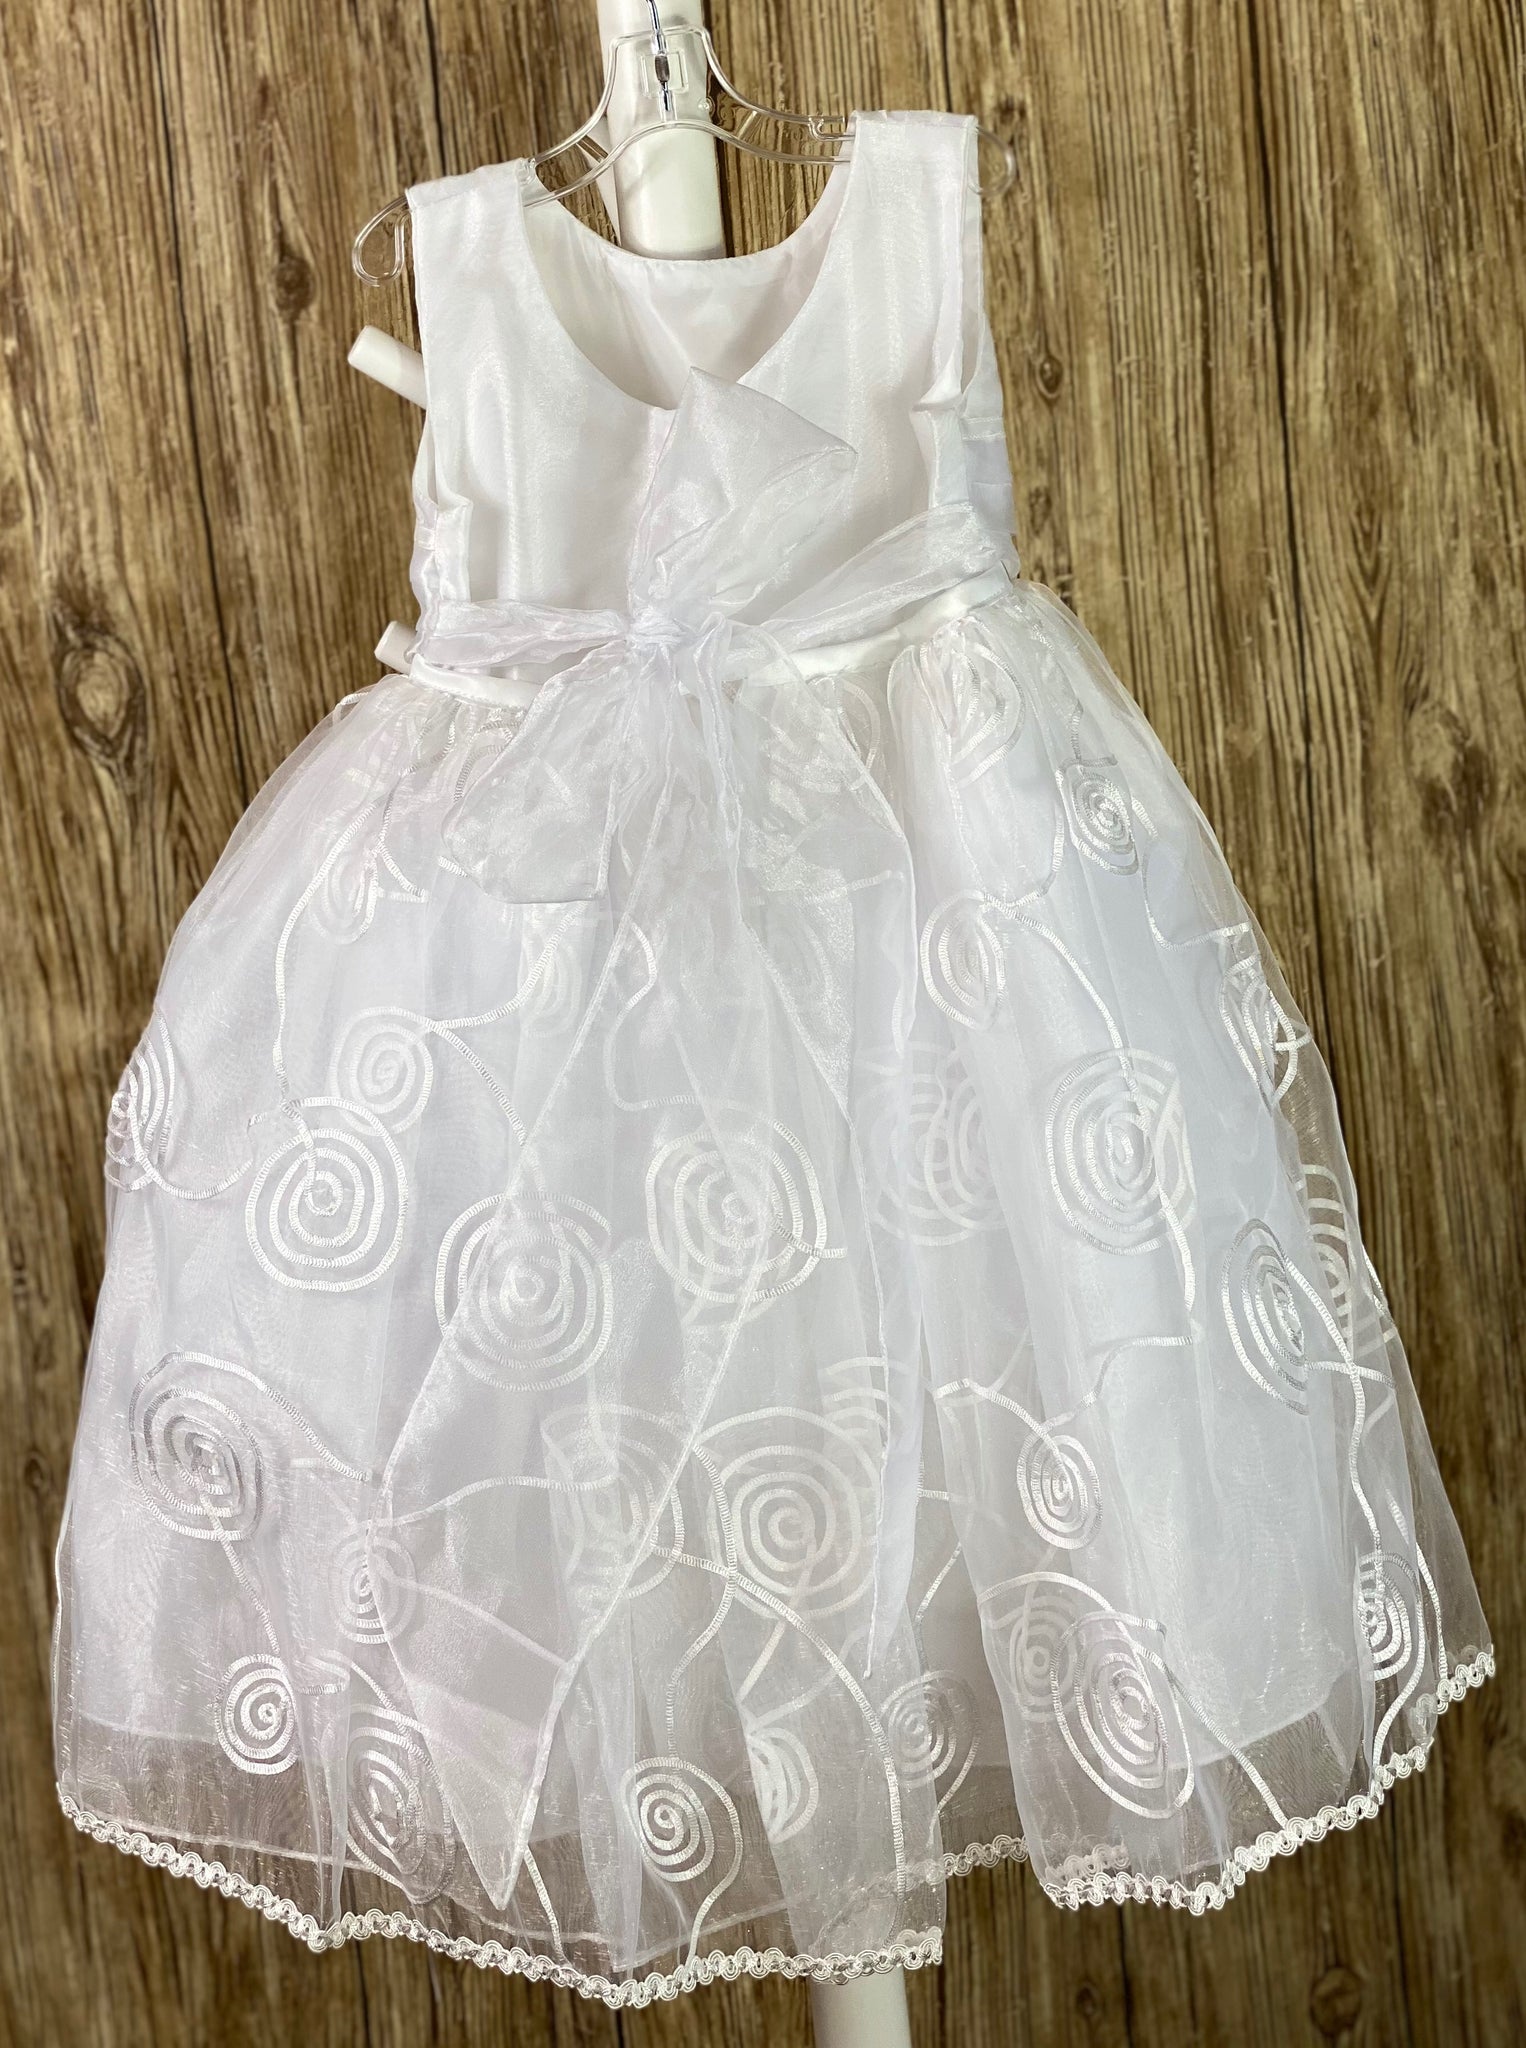 This a beautiful, one-of-a-kind baptism gown.  A lovely gown for a precious child.  White, size 24M Satin bodice Pleated satin belting Swirled mesh tulle skirting Mesh bow in the back